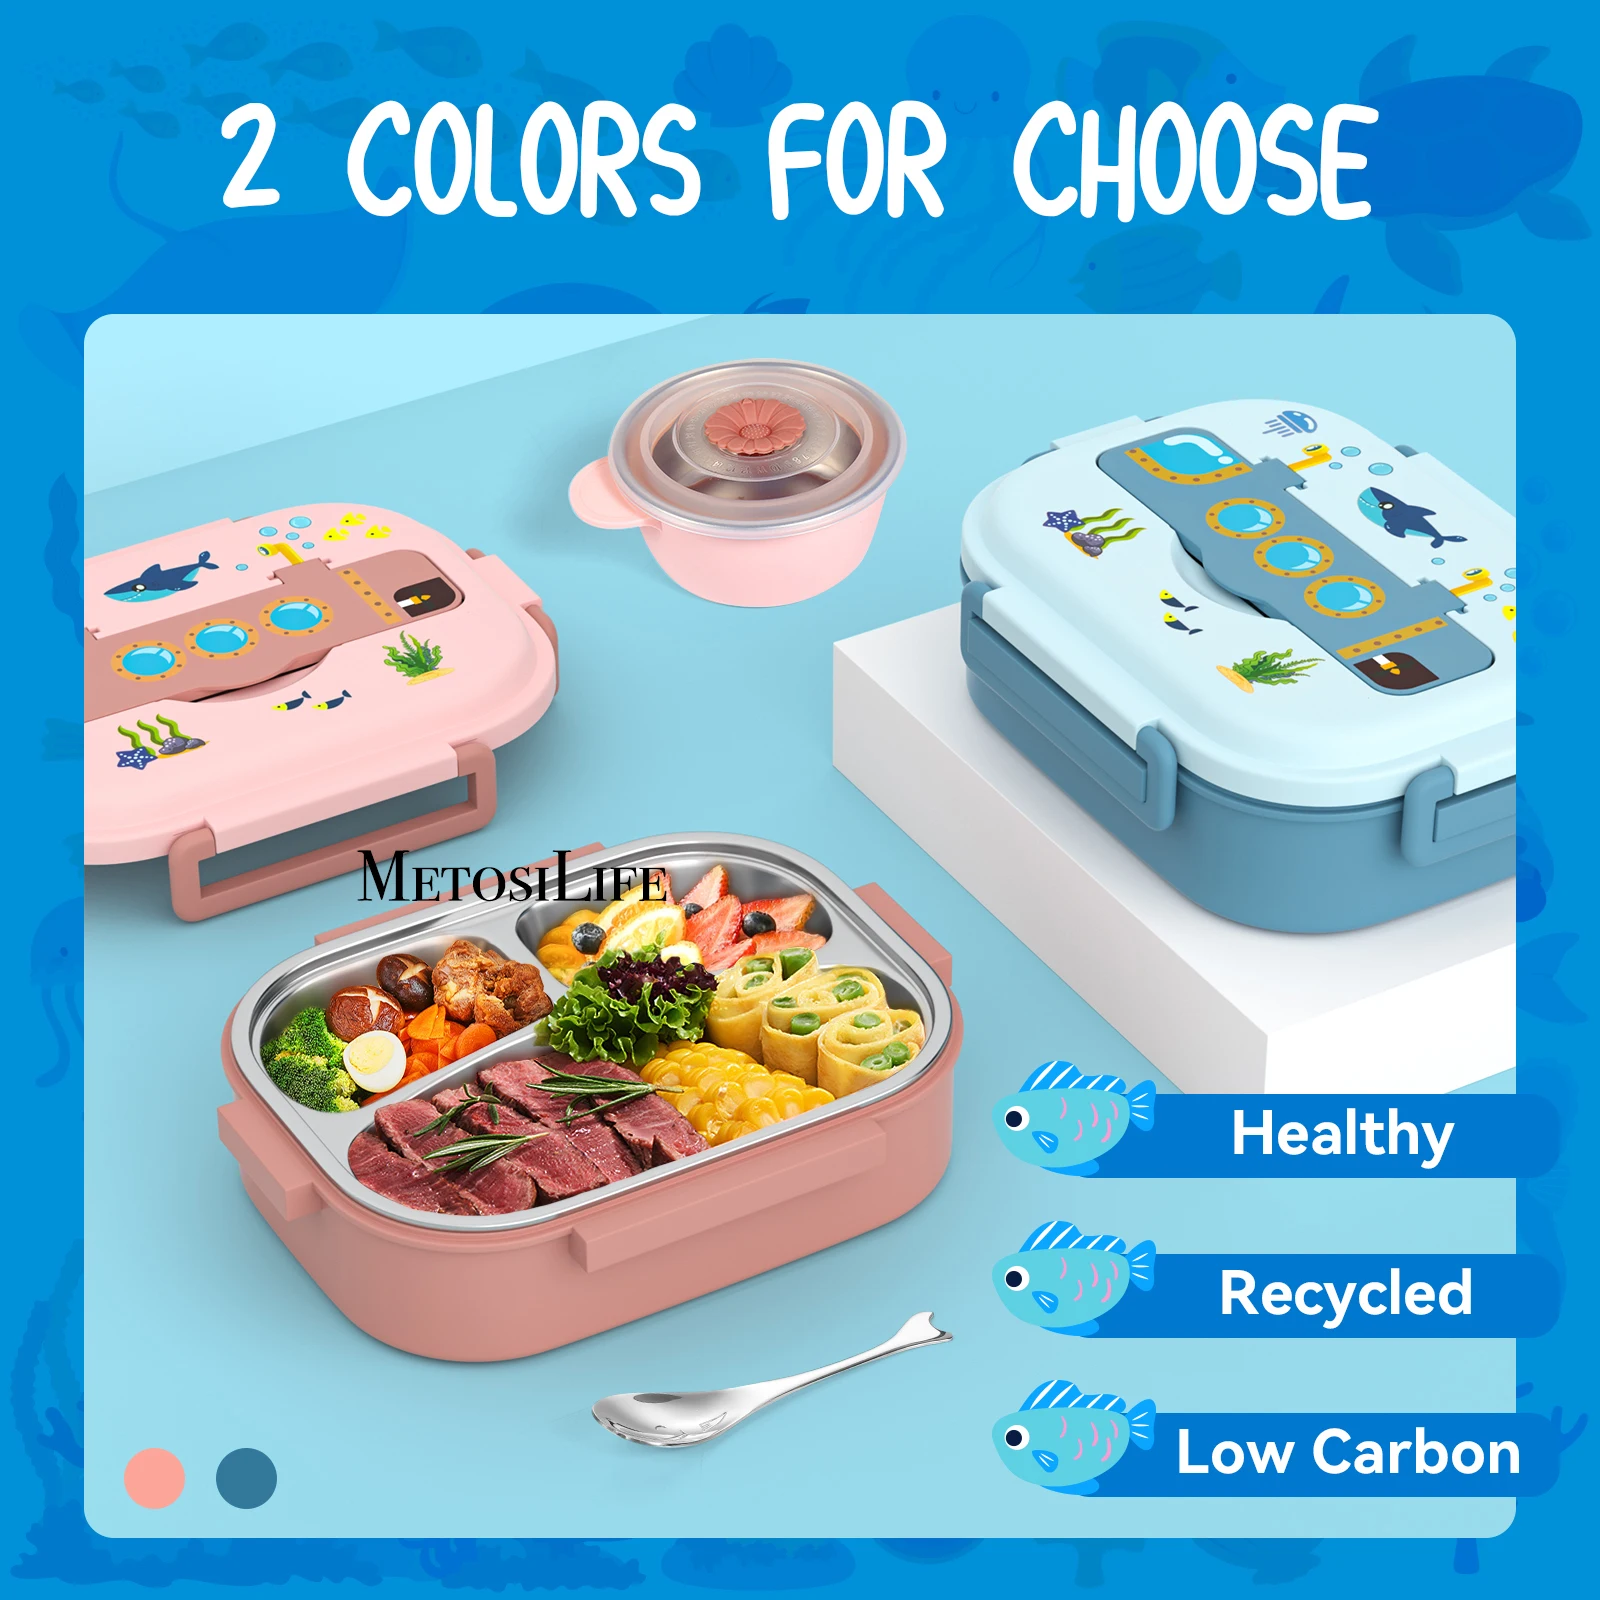 https://ae01.alicdn.com/kf/H94ad6a246bcf43f2bdd1dcebe2bc06fad/Ocean-World-Themed-Lunch-Box-Set-Of-Three-18-8-Stainless-Steel-And-BPA-Free-Toddler.jpg